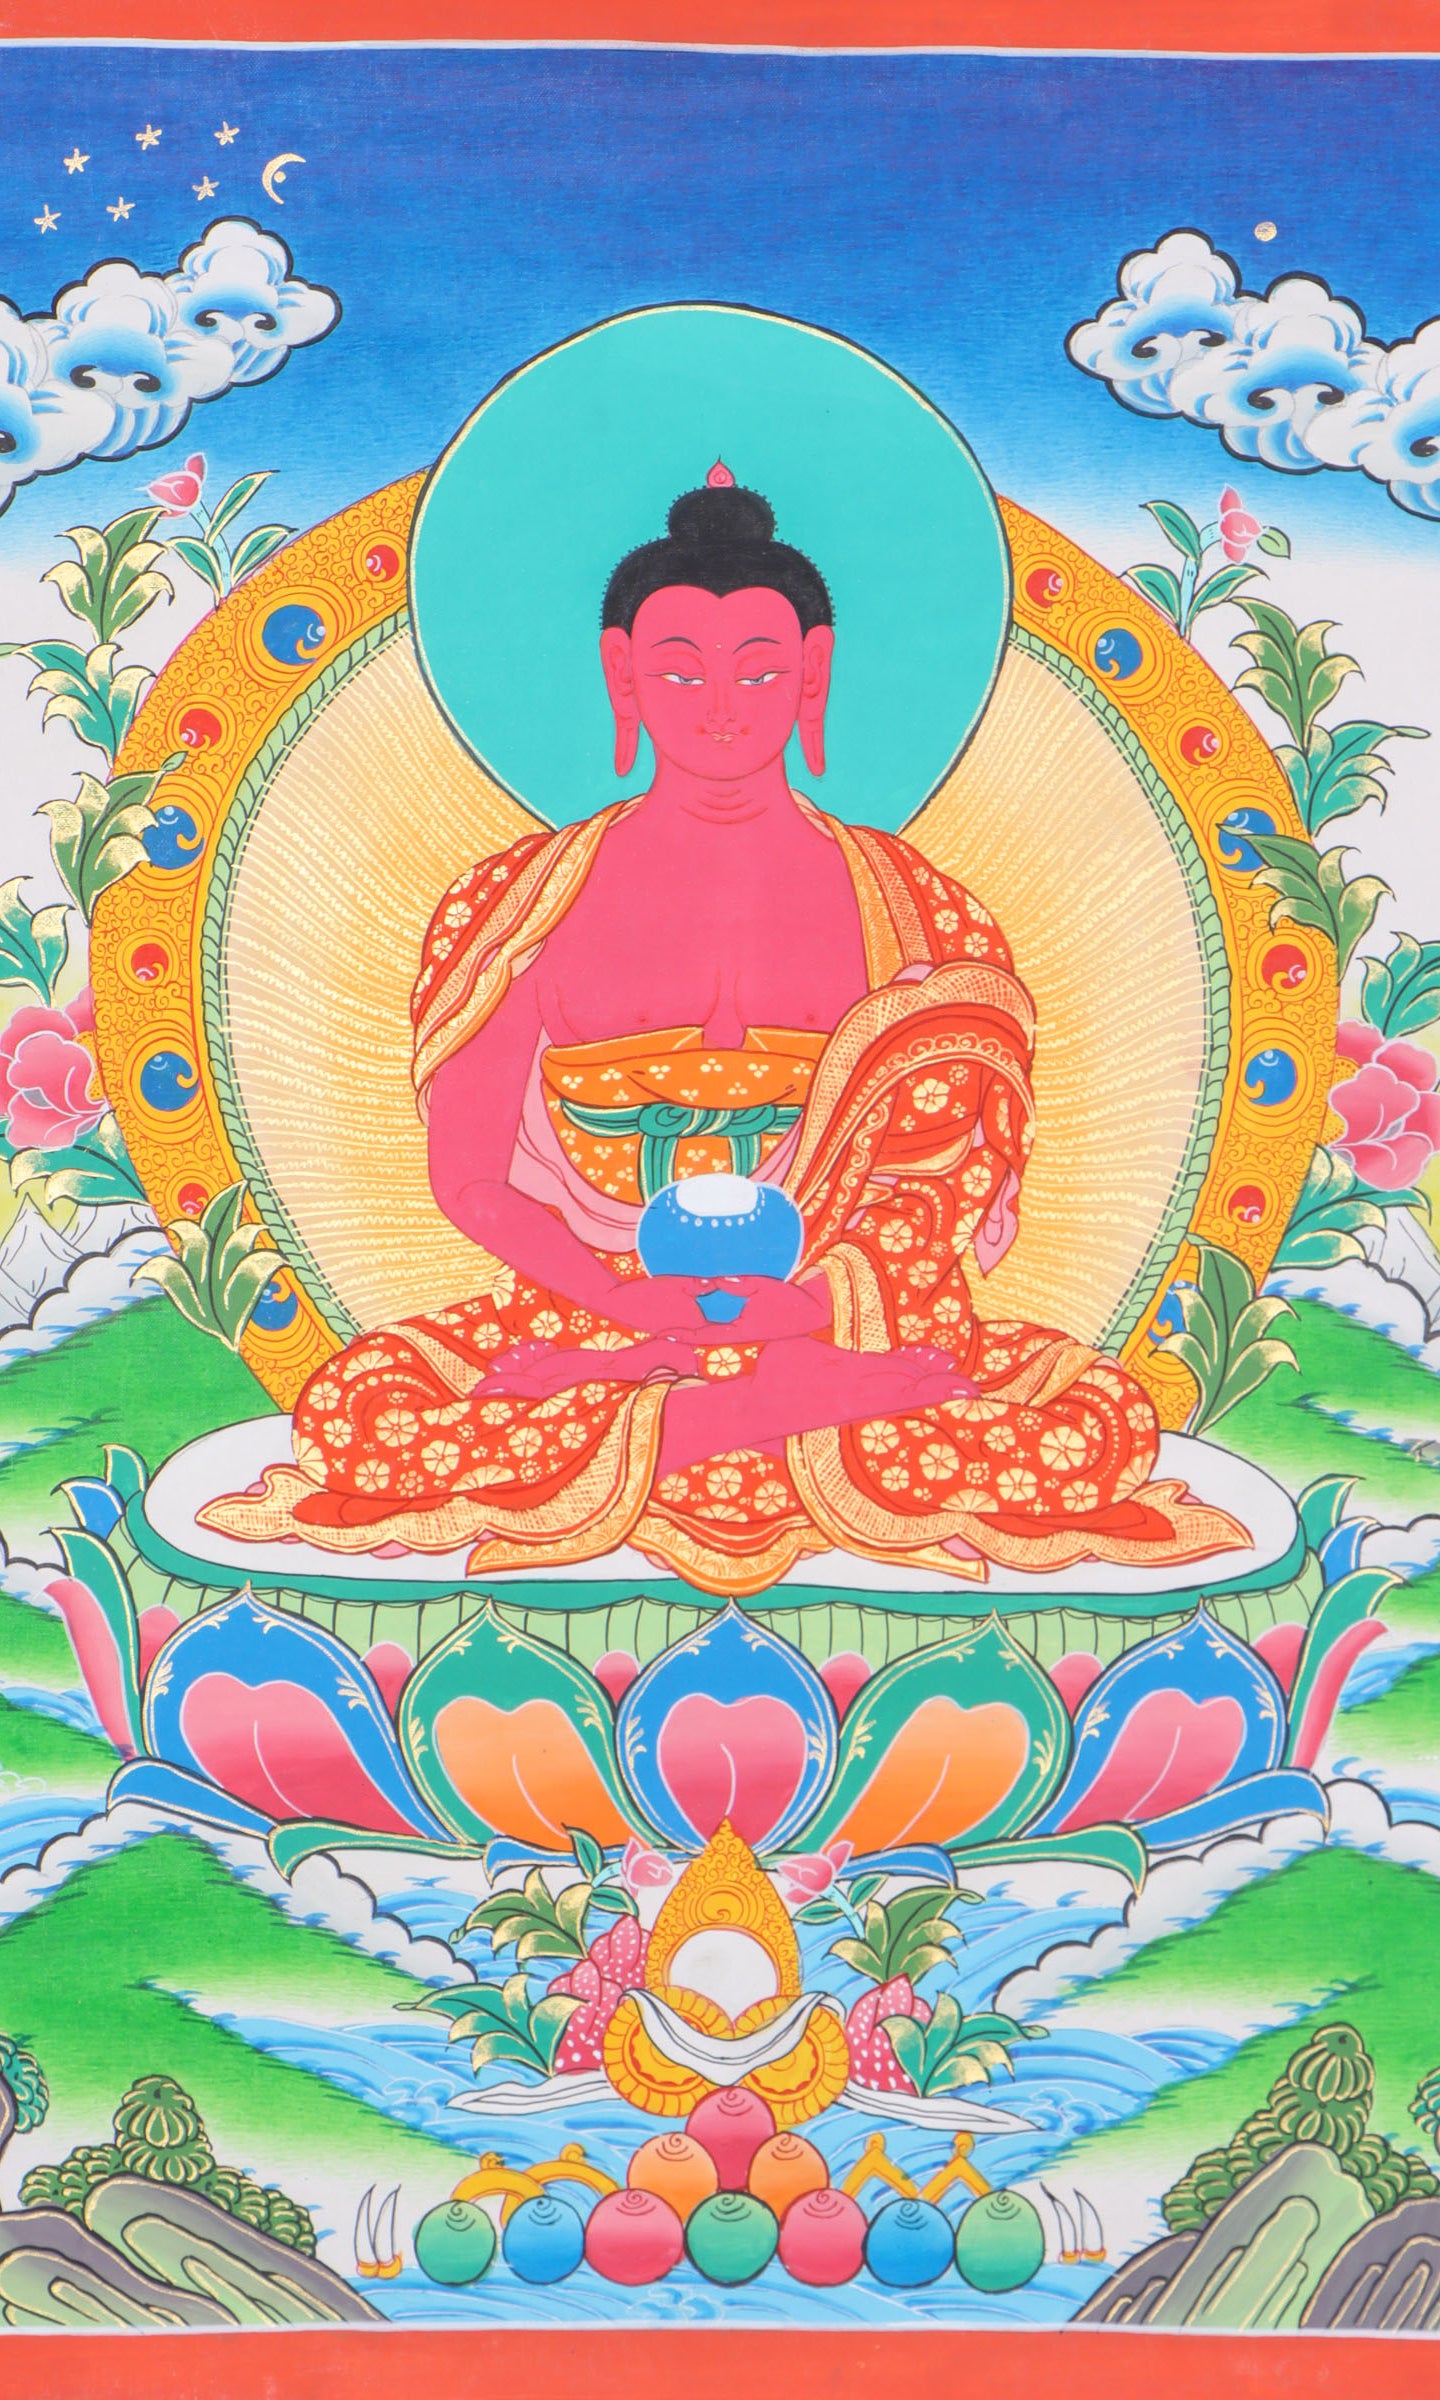 Amitabha Thangka holds deep spiritual significance within the context of Buddhist philosophy and practice.